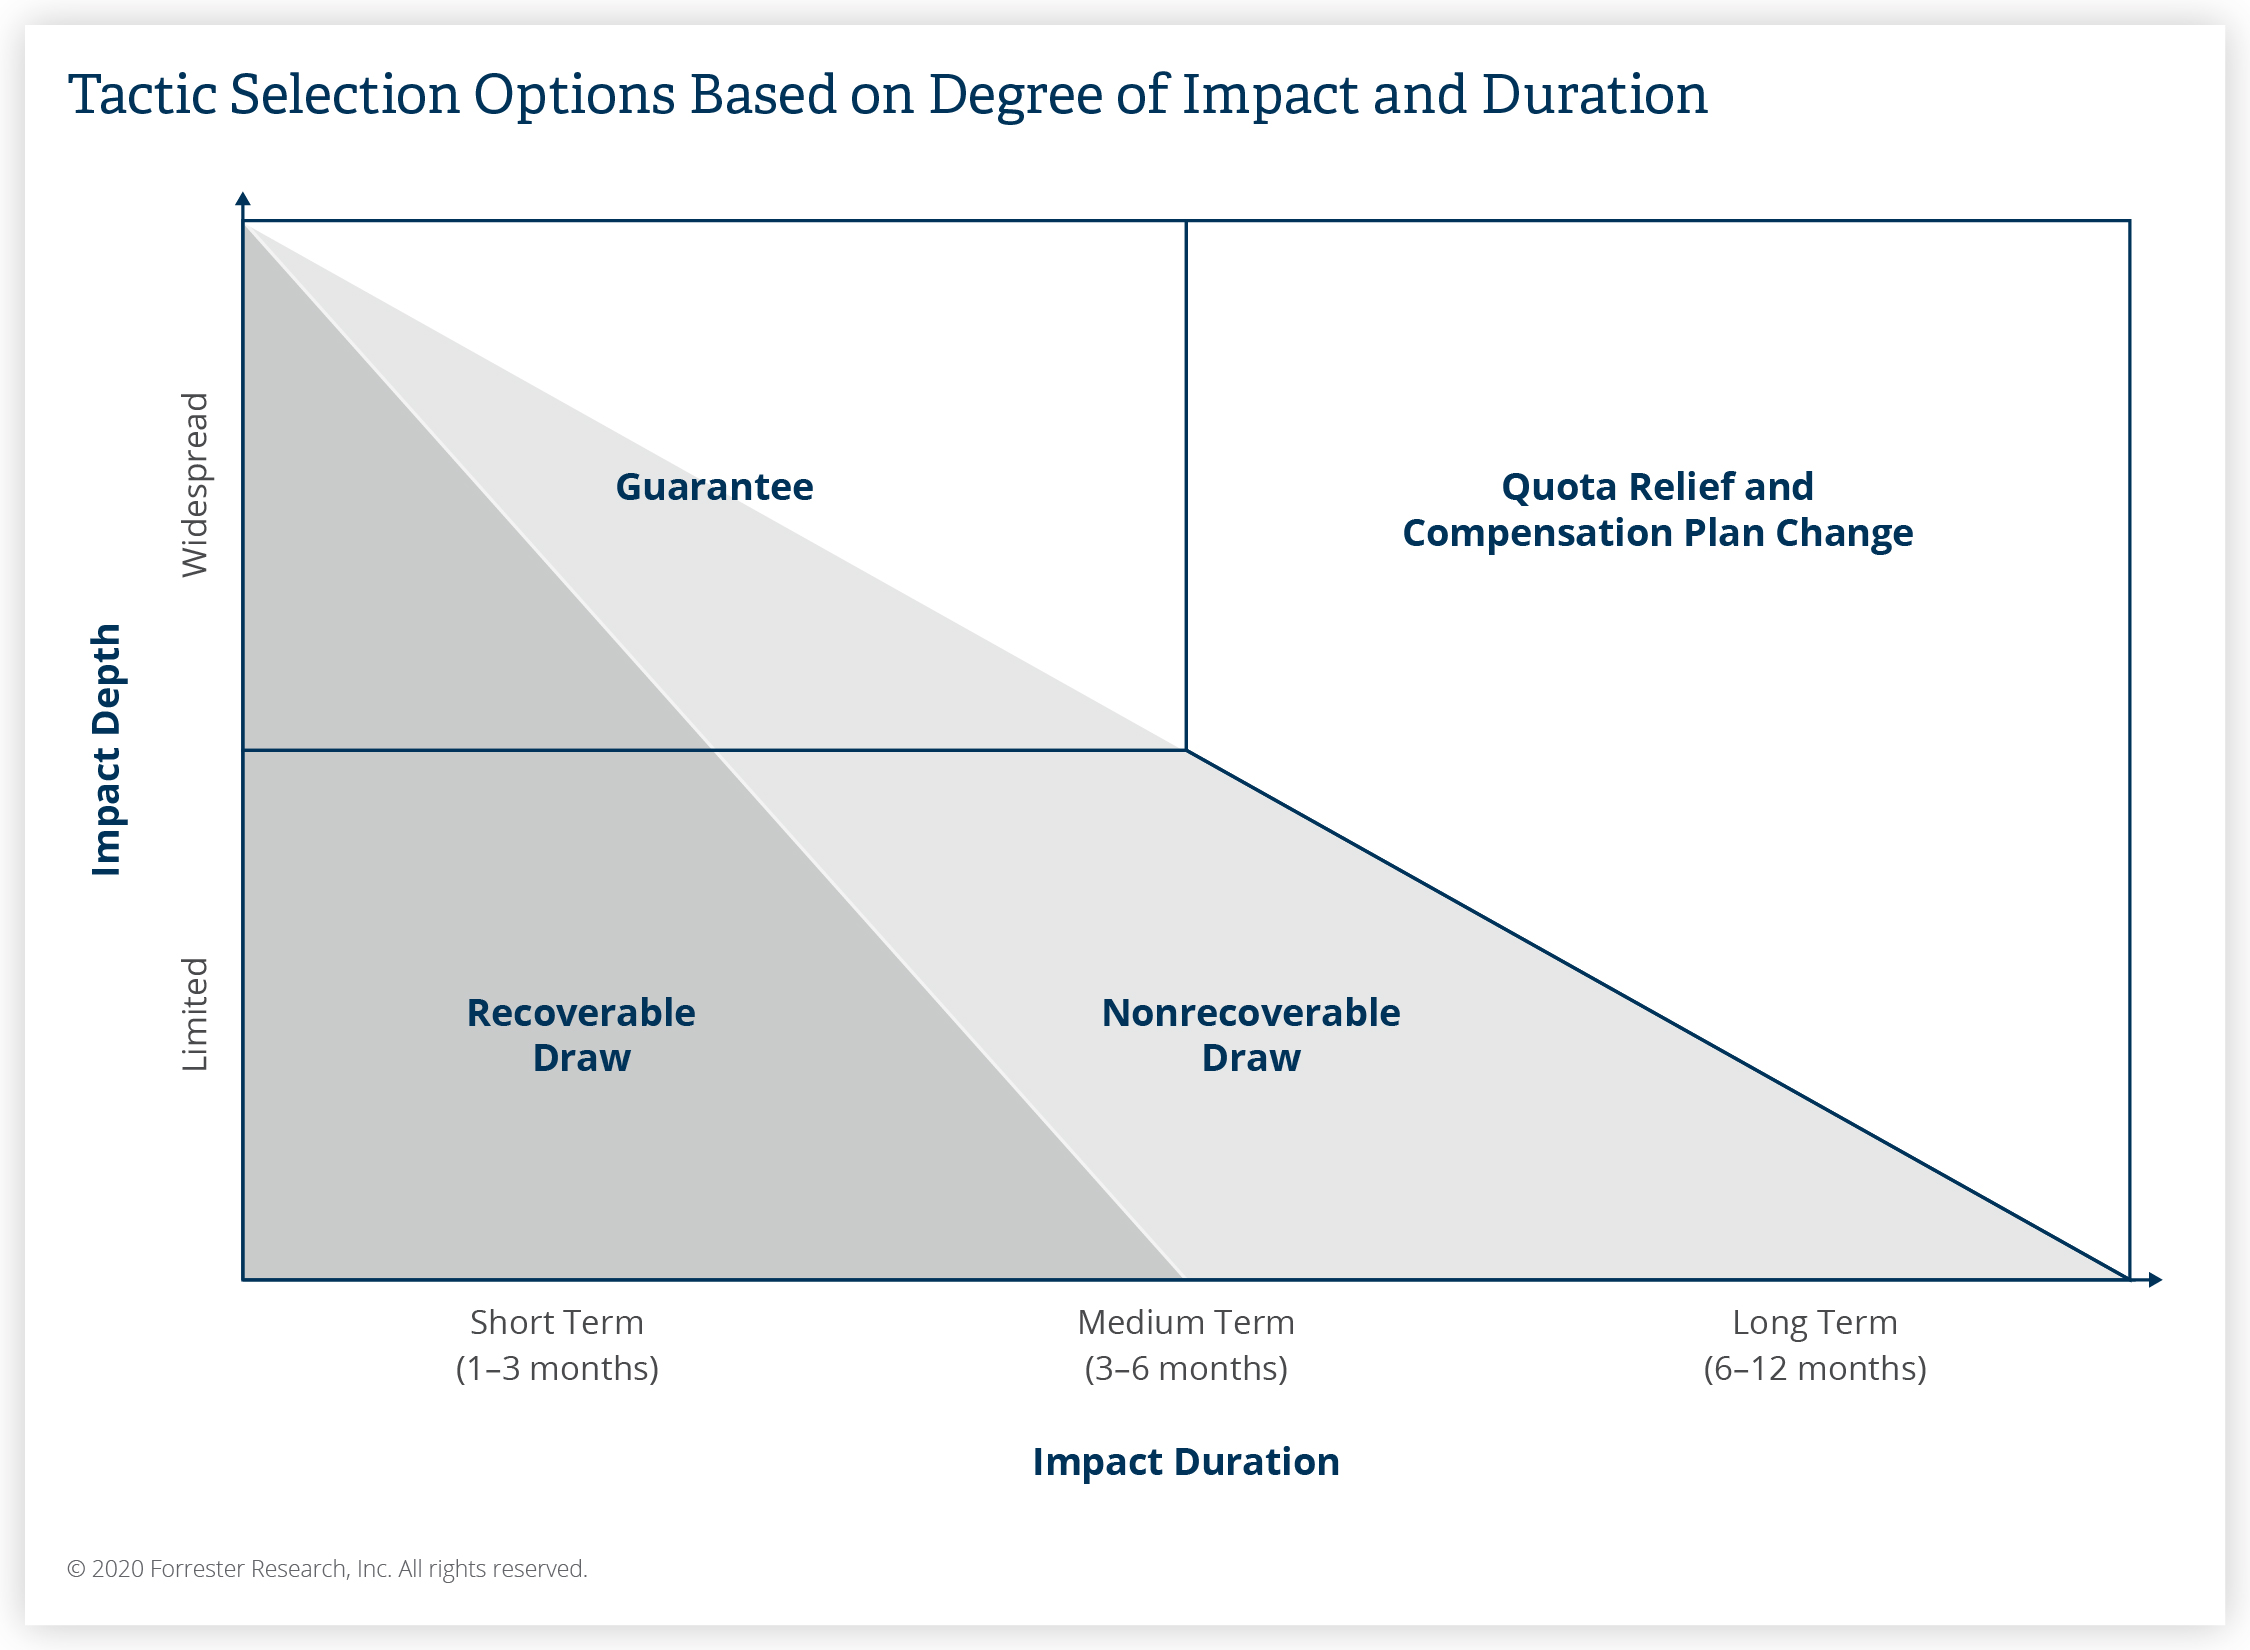 Tactic Selection Options Based on Degree of Impact and Duration